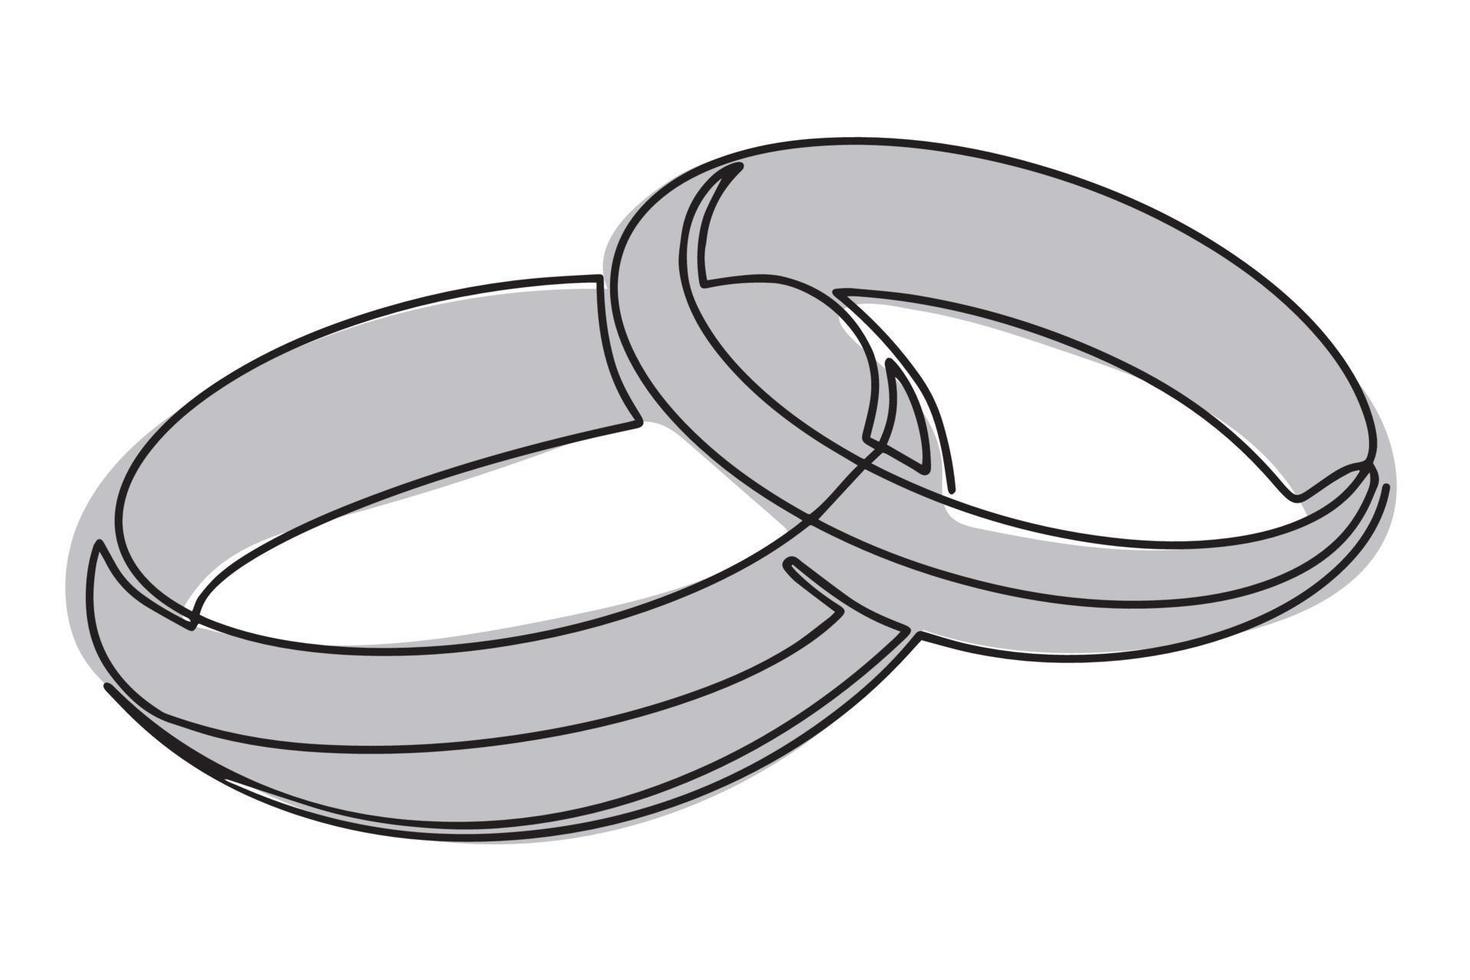 A continuous pattern of two rings. An icon of wedding rings on a white background. Fashionable minimalist illustration. Drawing in one line. Vector illustration